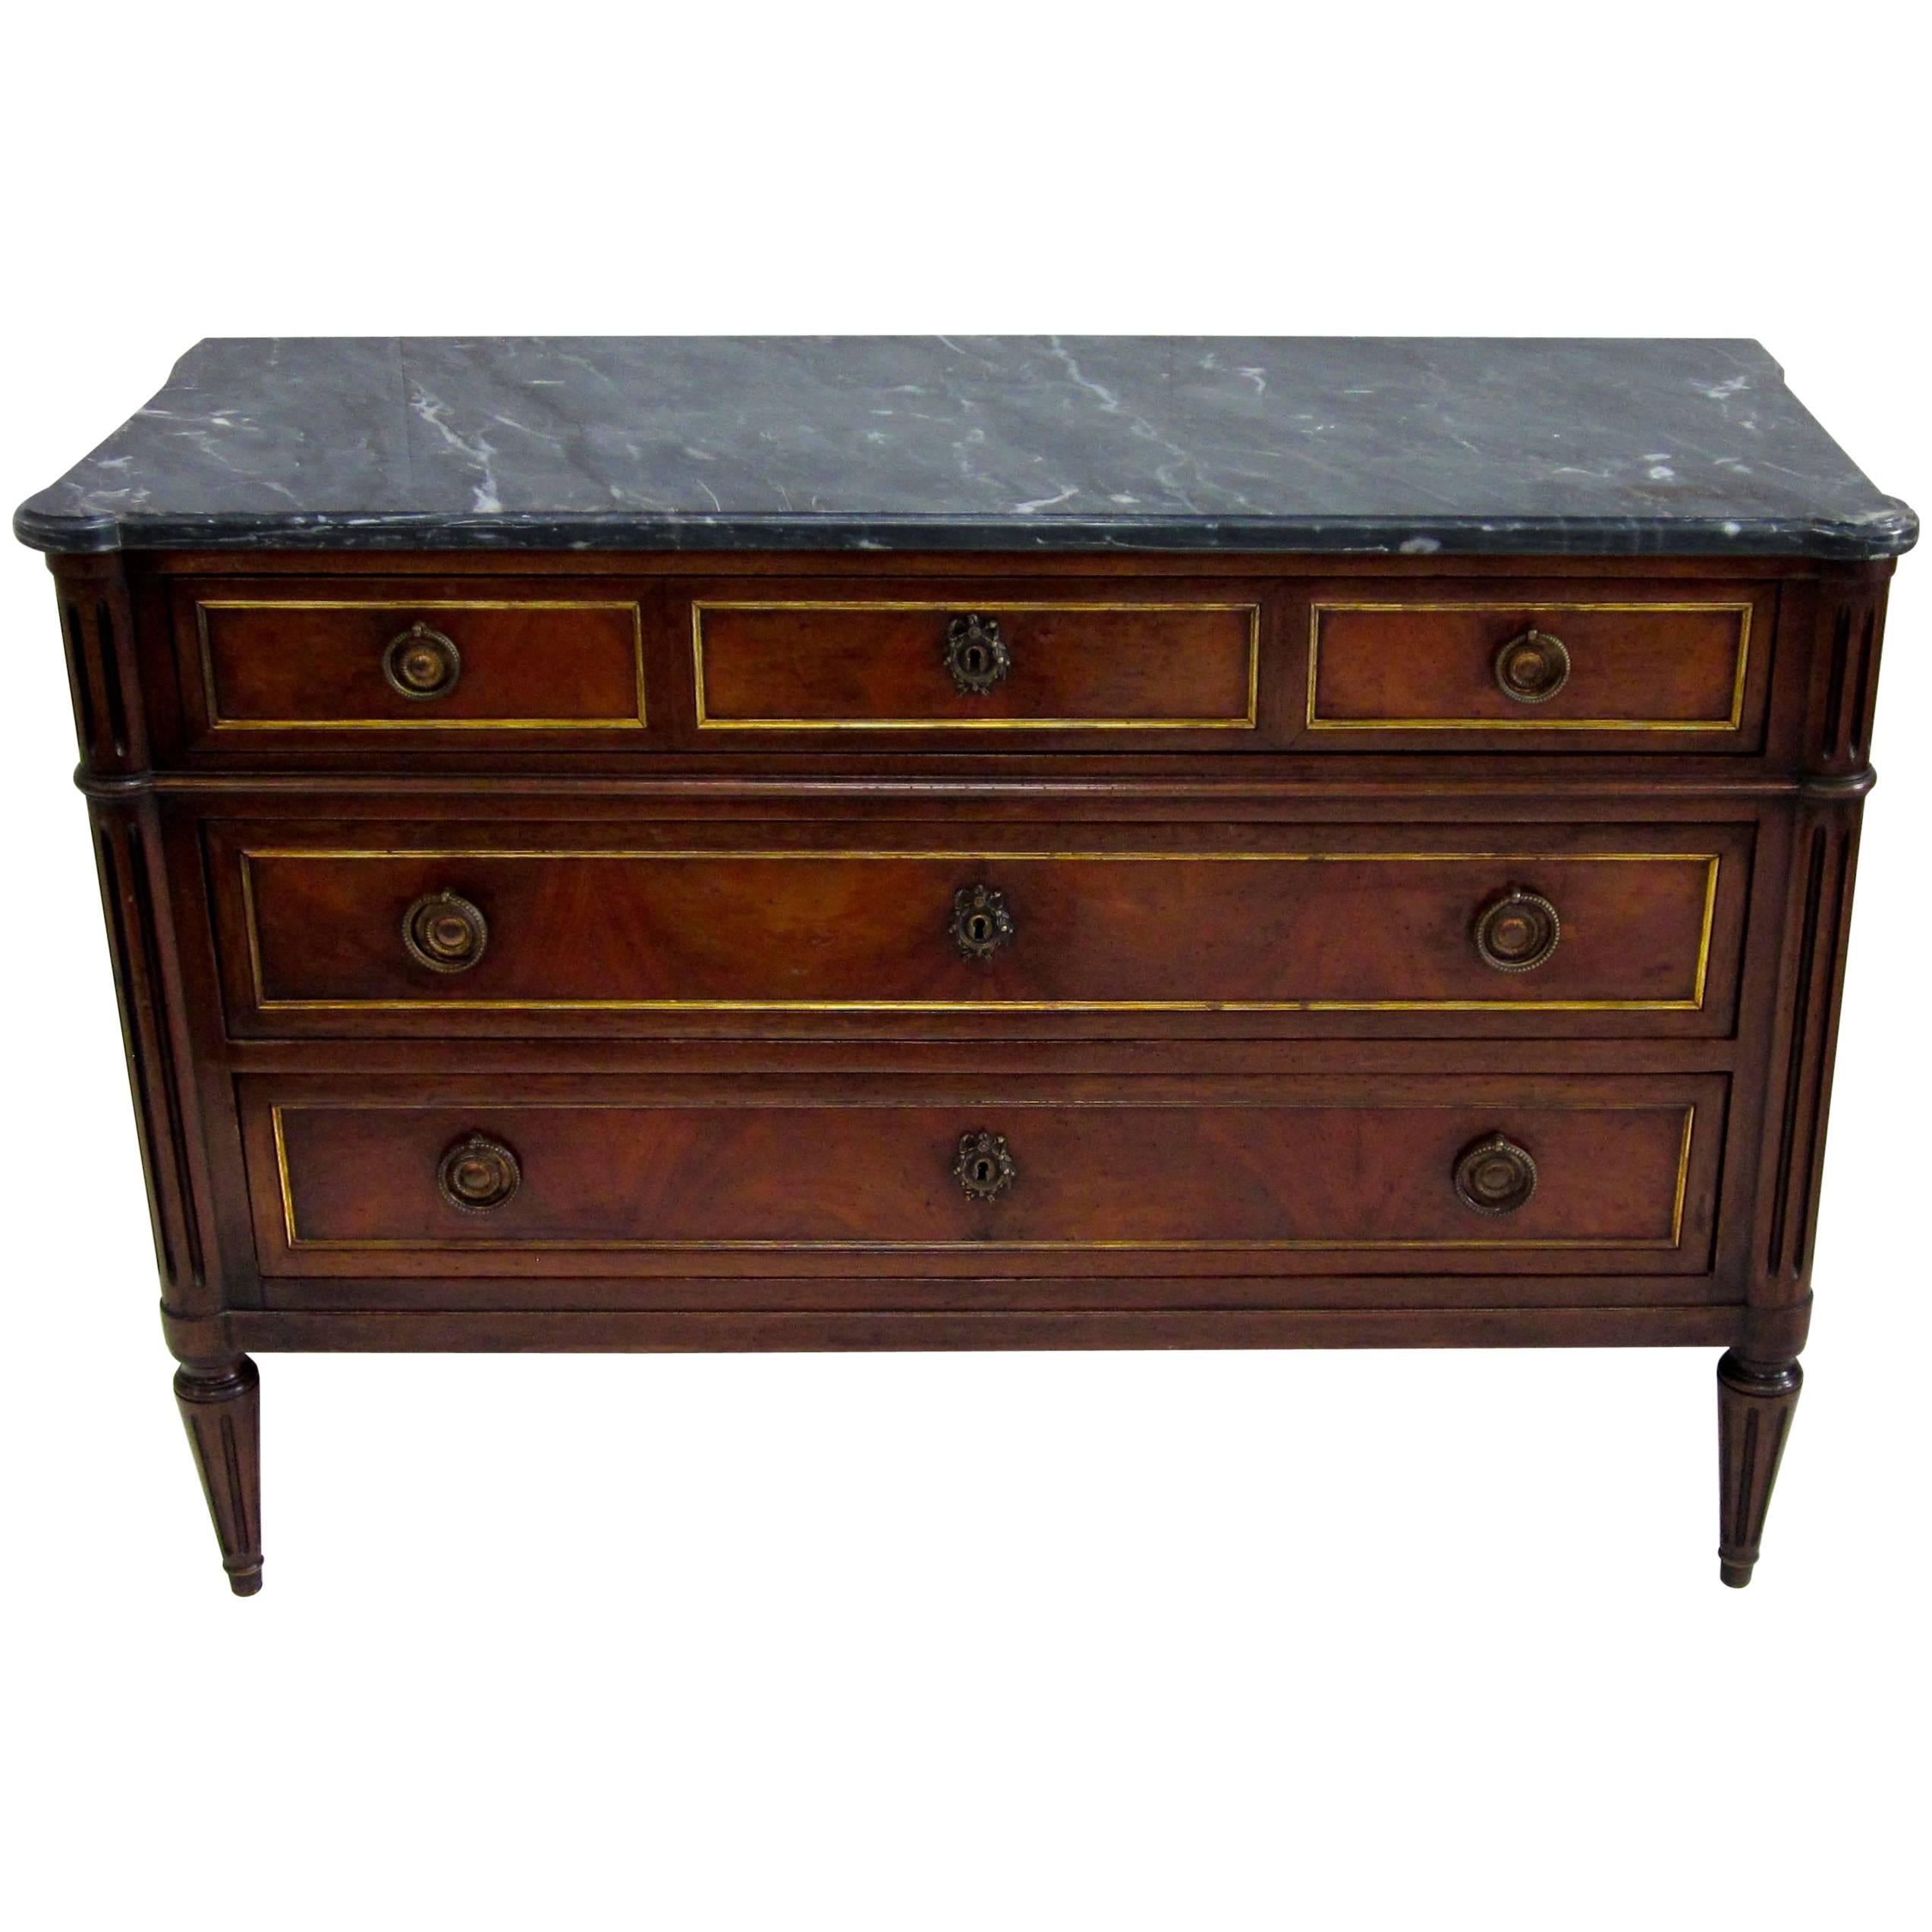 French Empire 19th Century Marble-Top Three-Drawer Walnut Commode